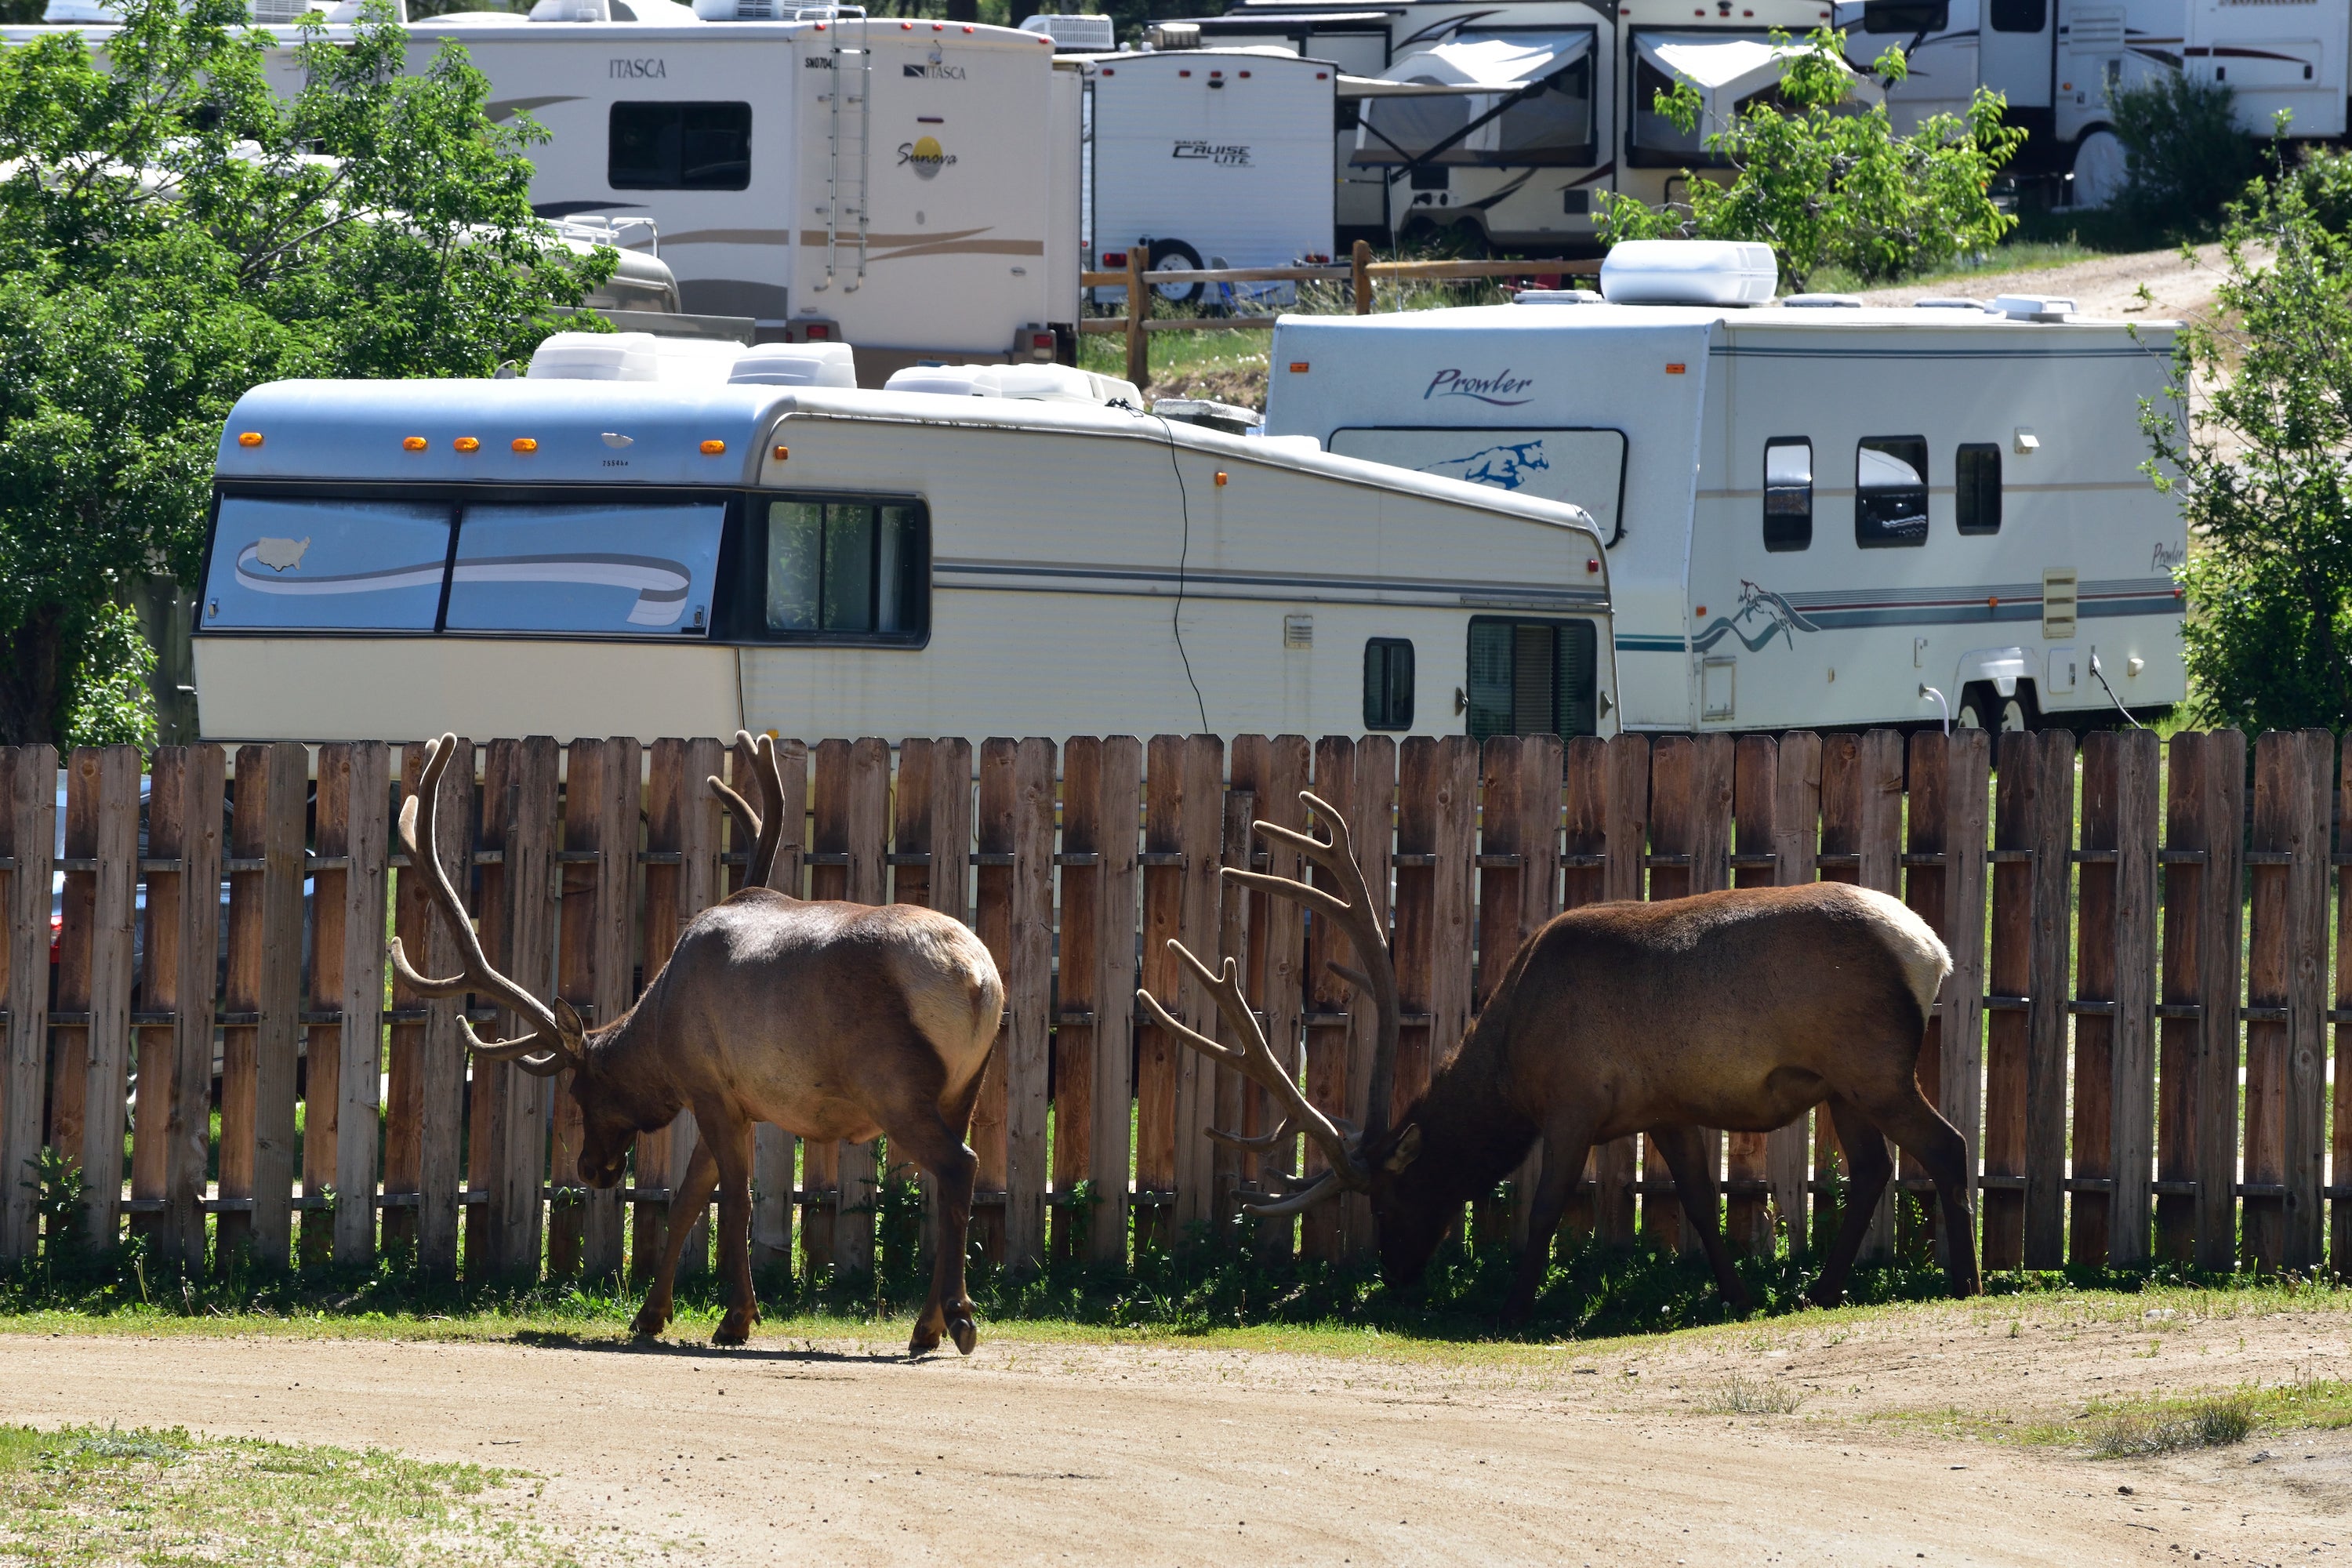 Elk in the campground.